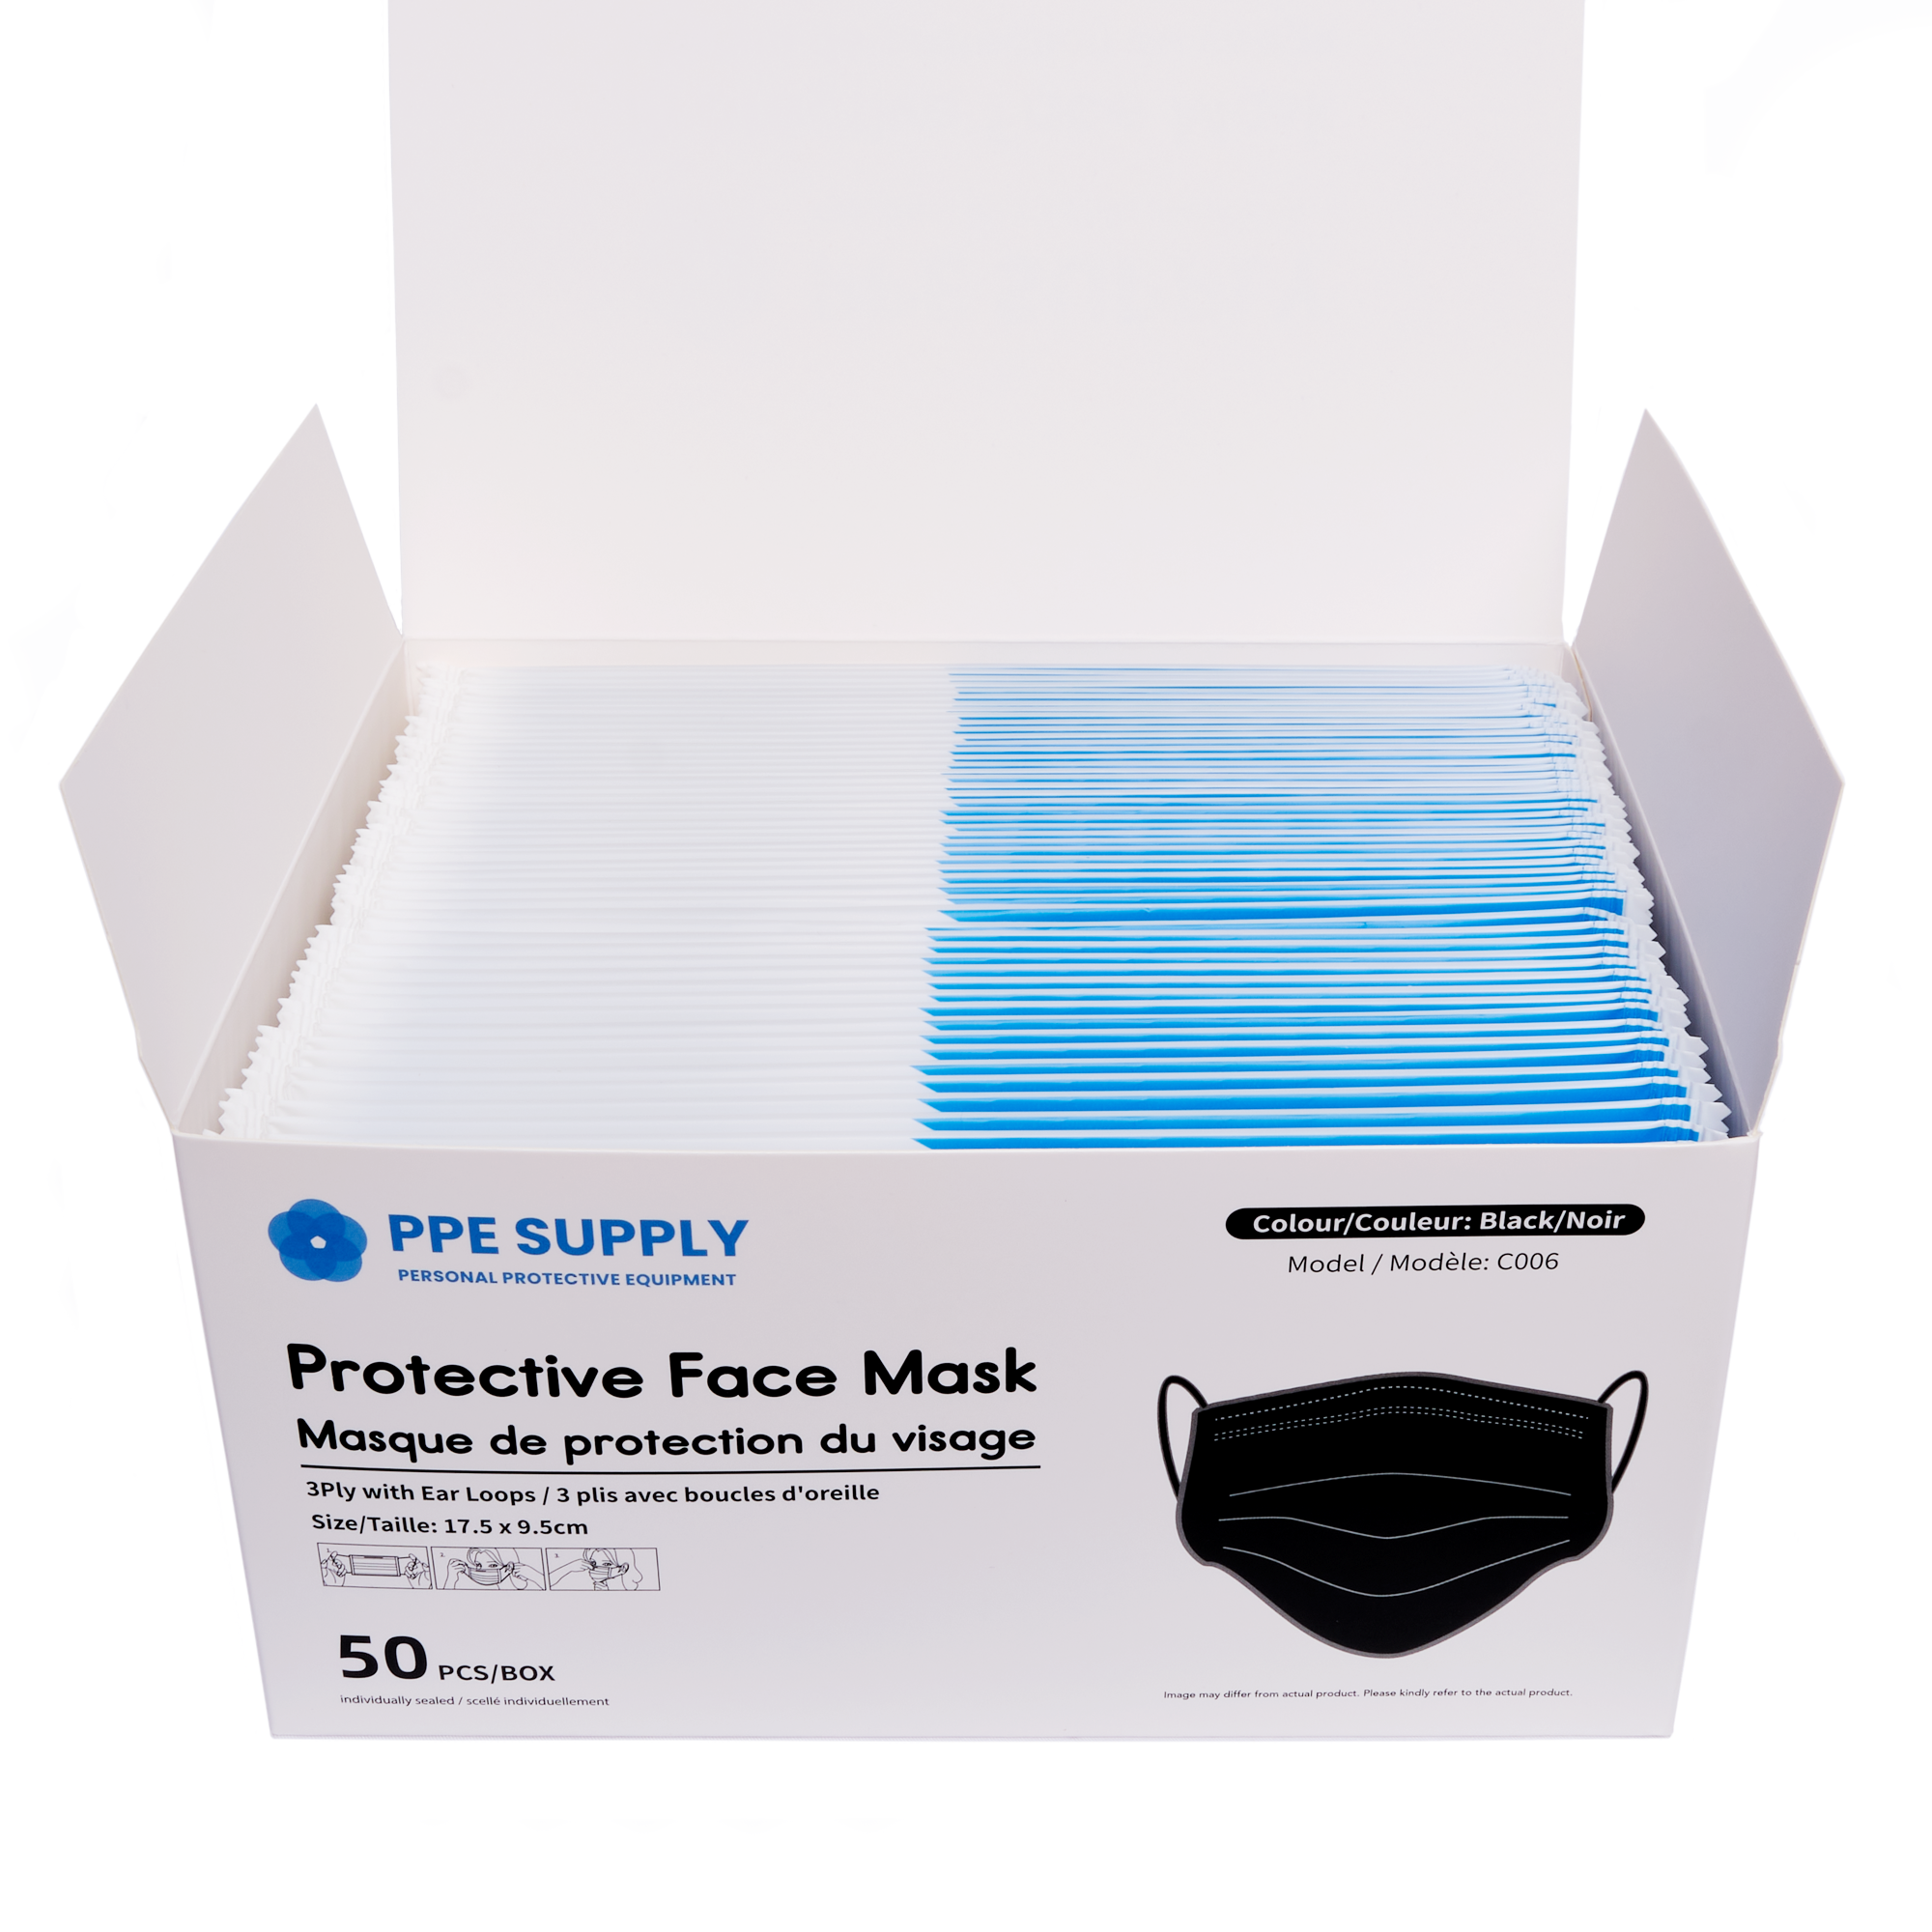 Black Disposable Face Mask Each Individually Sealed by PPE Supply (50 Masks)